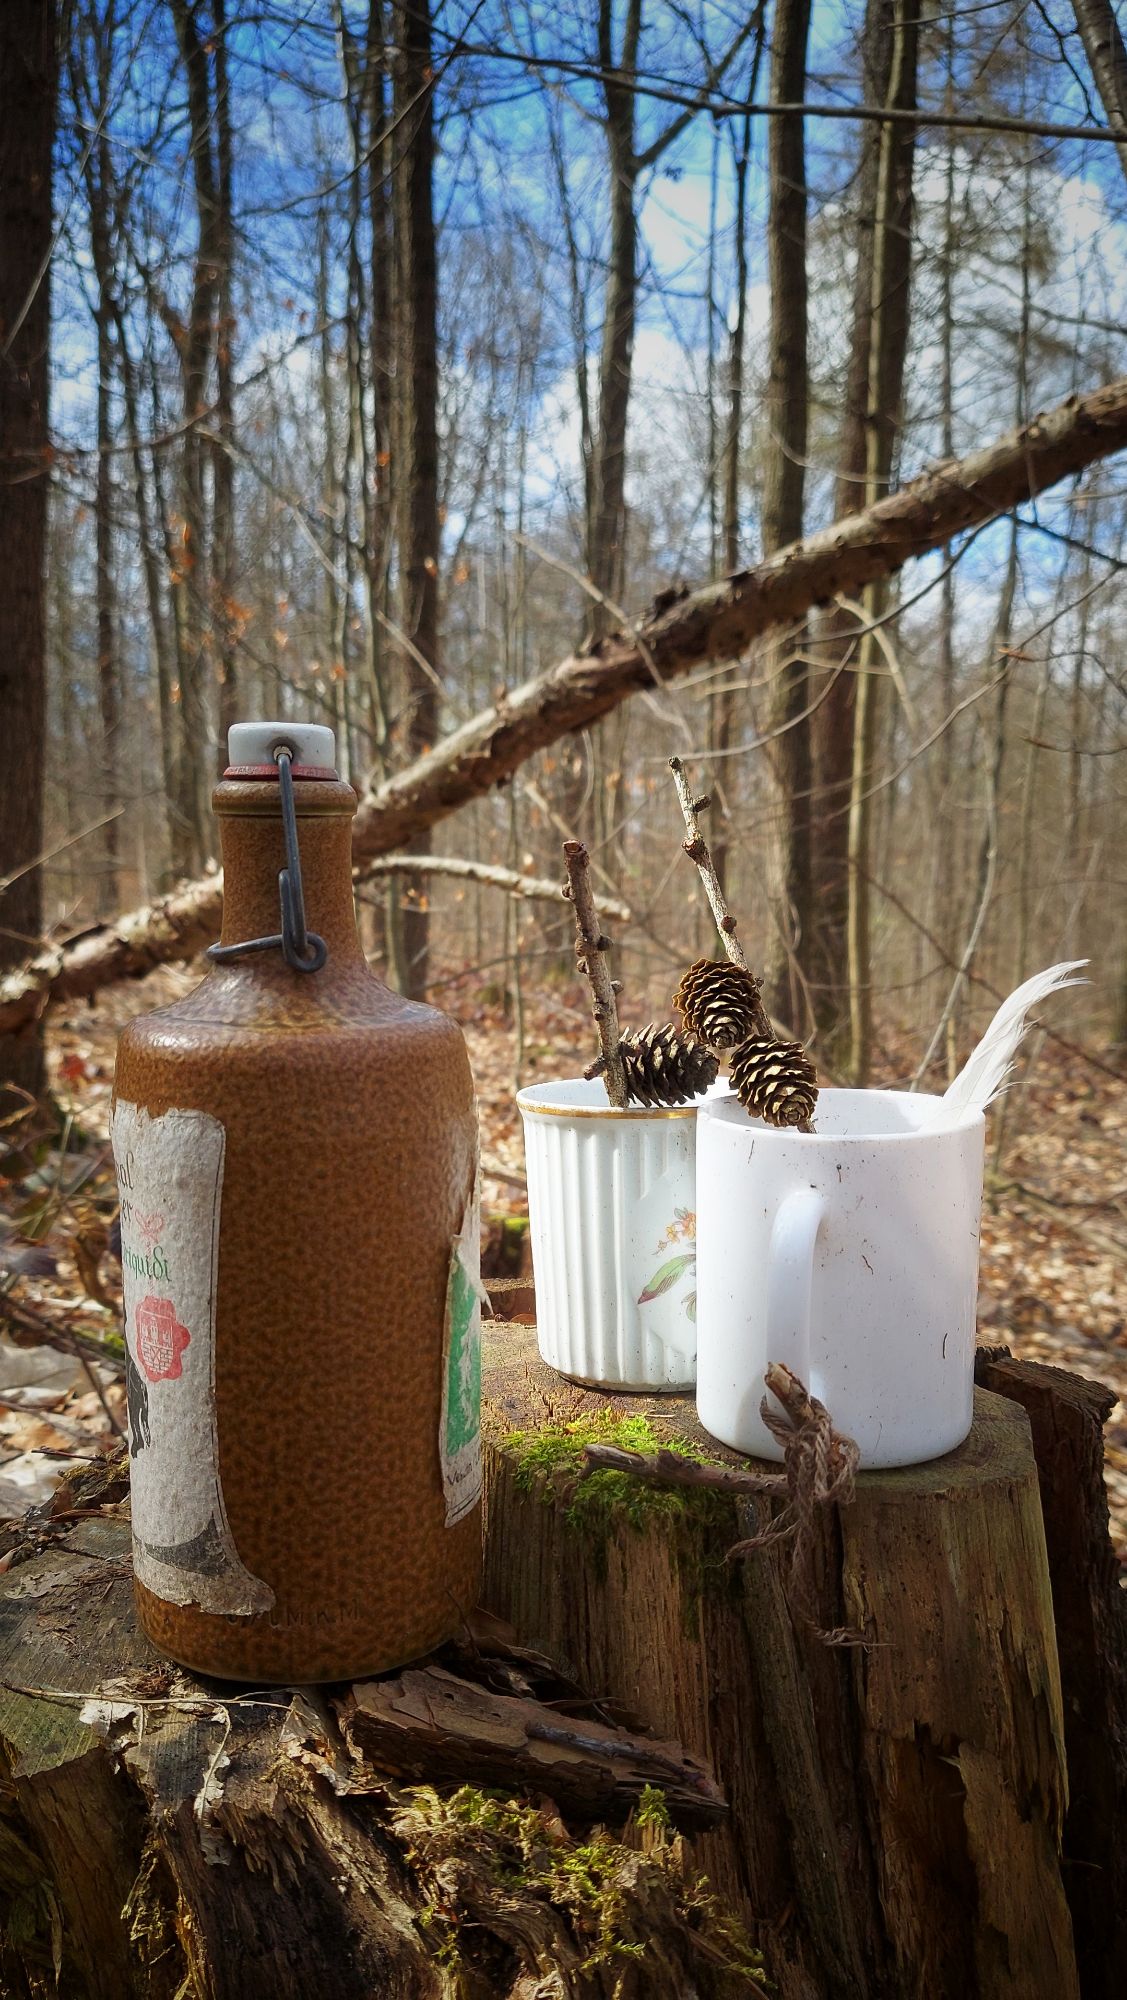 Forest art, a closed bottle and two cups.